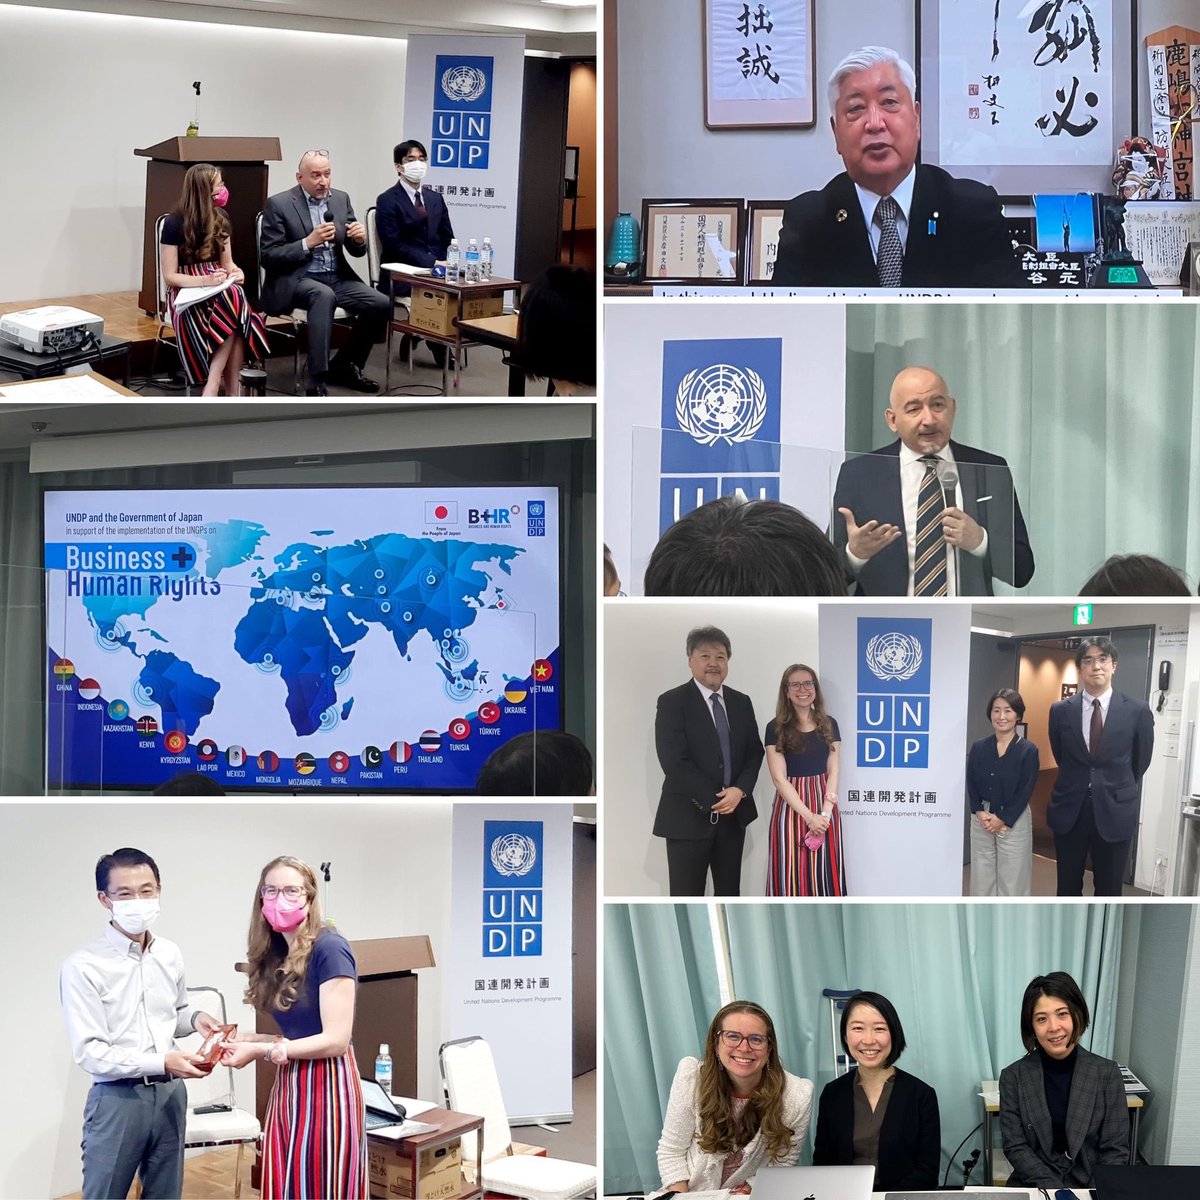 Our CEO @NessZim is in Japan with the @BizHRAsia_UNDP team to deliver tailor-made training on #humanrightsduediligence for around 50 Japanese companies from a range of industries supported by the Japanese Gov. #bizhumanrights #supplychains #esg #susty